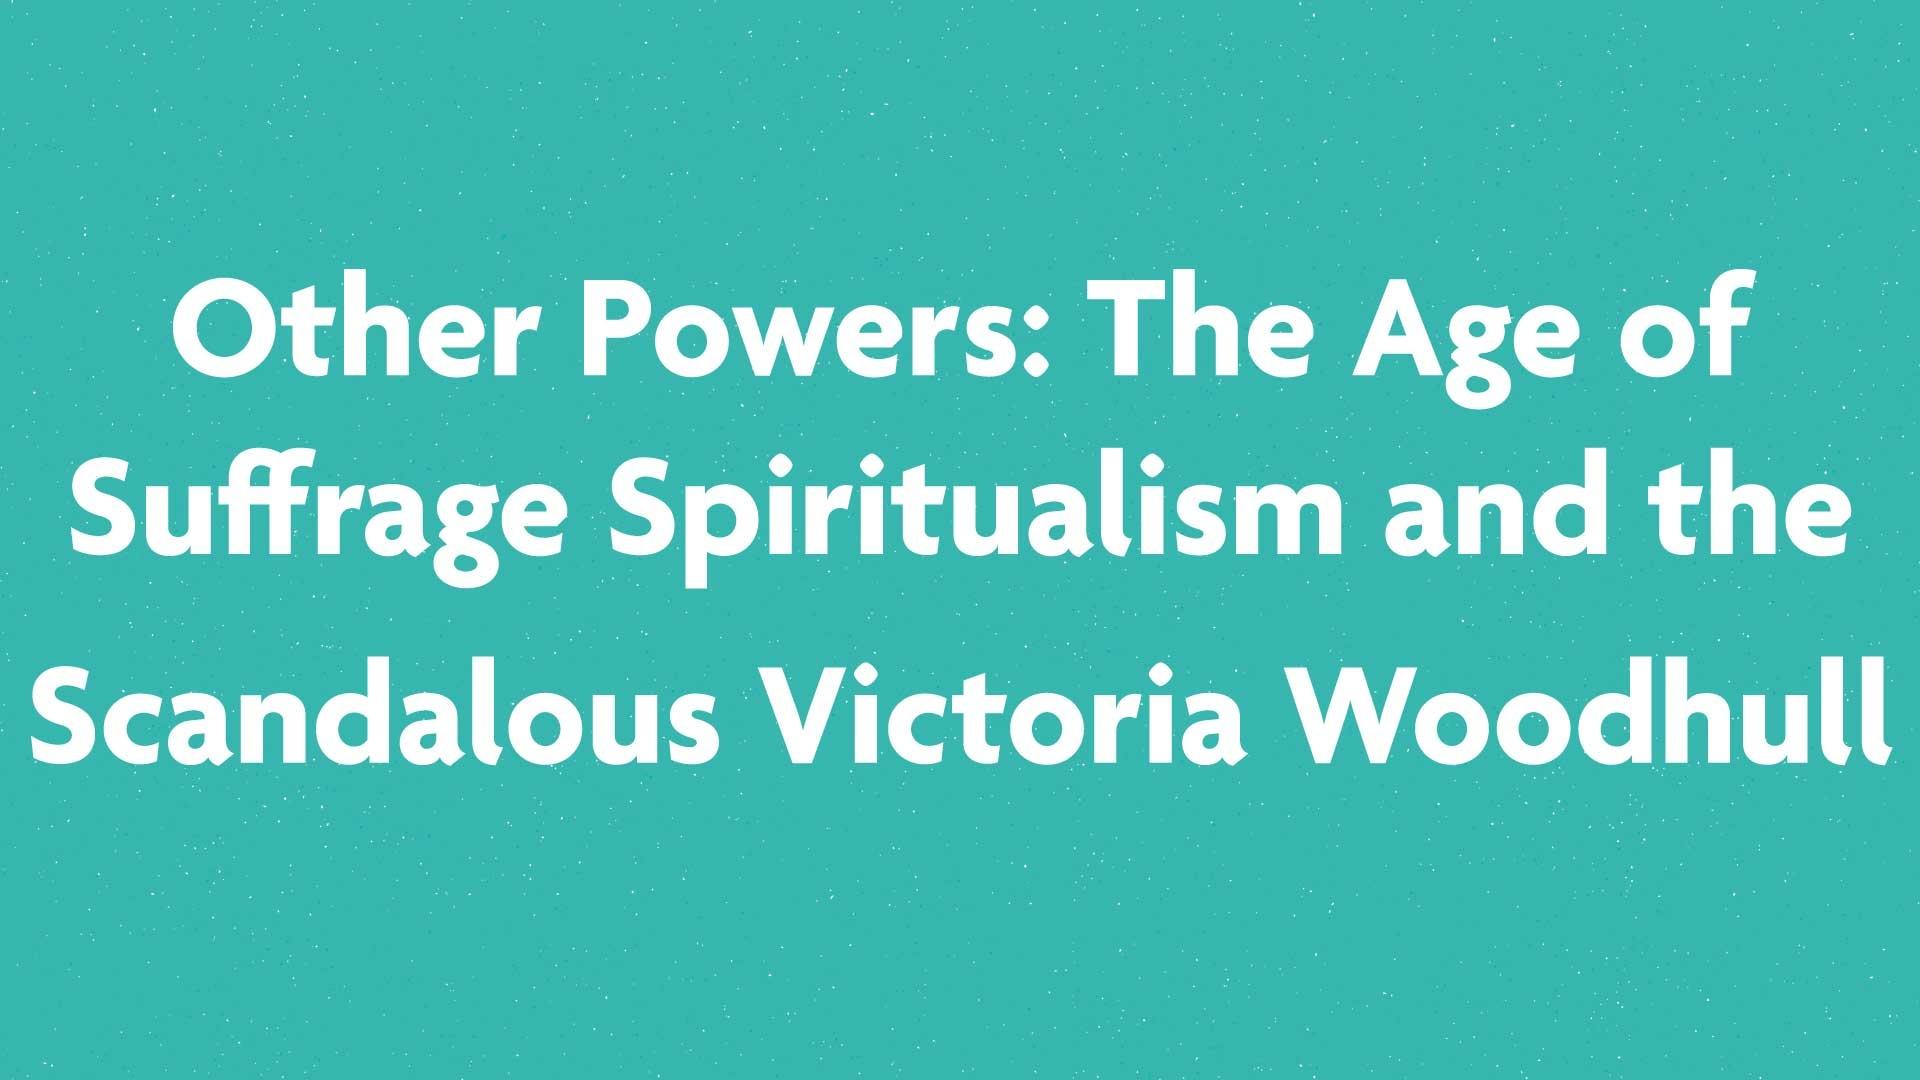 Other Powers: The Age of Suffrage Spiritualism and the Scandalous Victoria Woodhull book submission card on a green background.